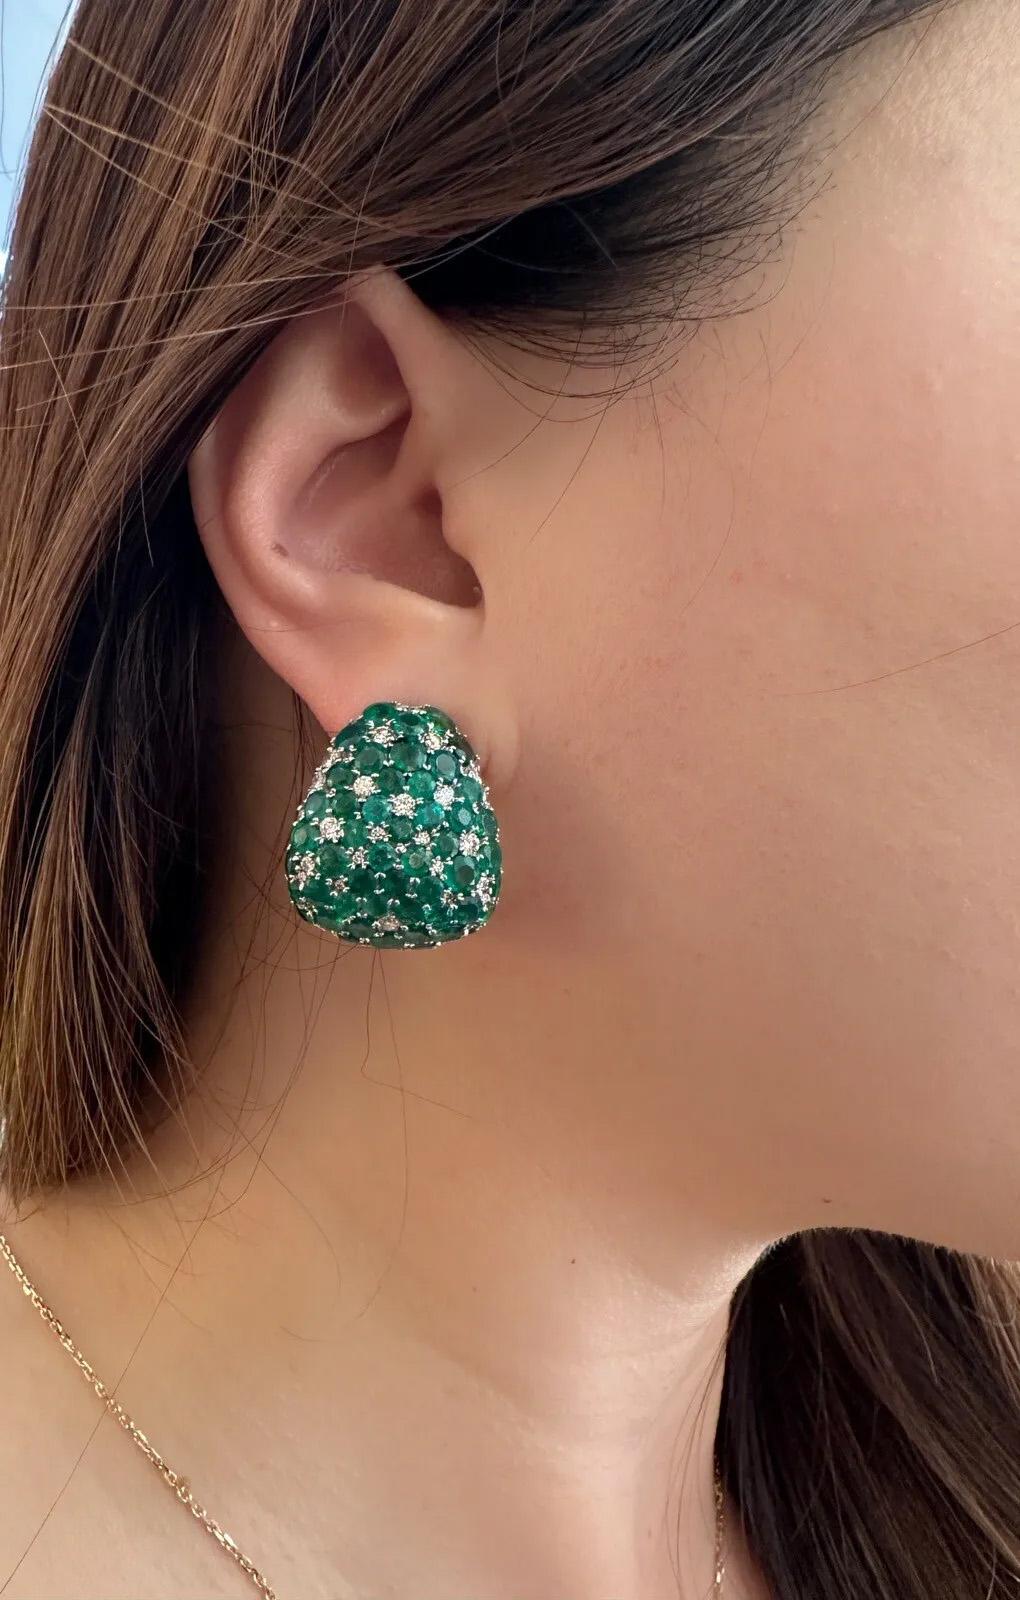 Large Emerald and Diamond Half-hoop Earrings 
in 18k White Gold 

Emerald and Diamond Earrings features a triangular half-hoop design with Natural Round Emeralds weighing 16.52 carats, pave set with Round Brilliant Diamonds weighing 2.31 carats, set